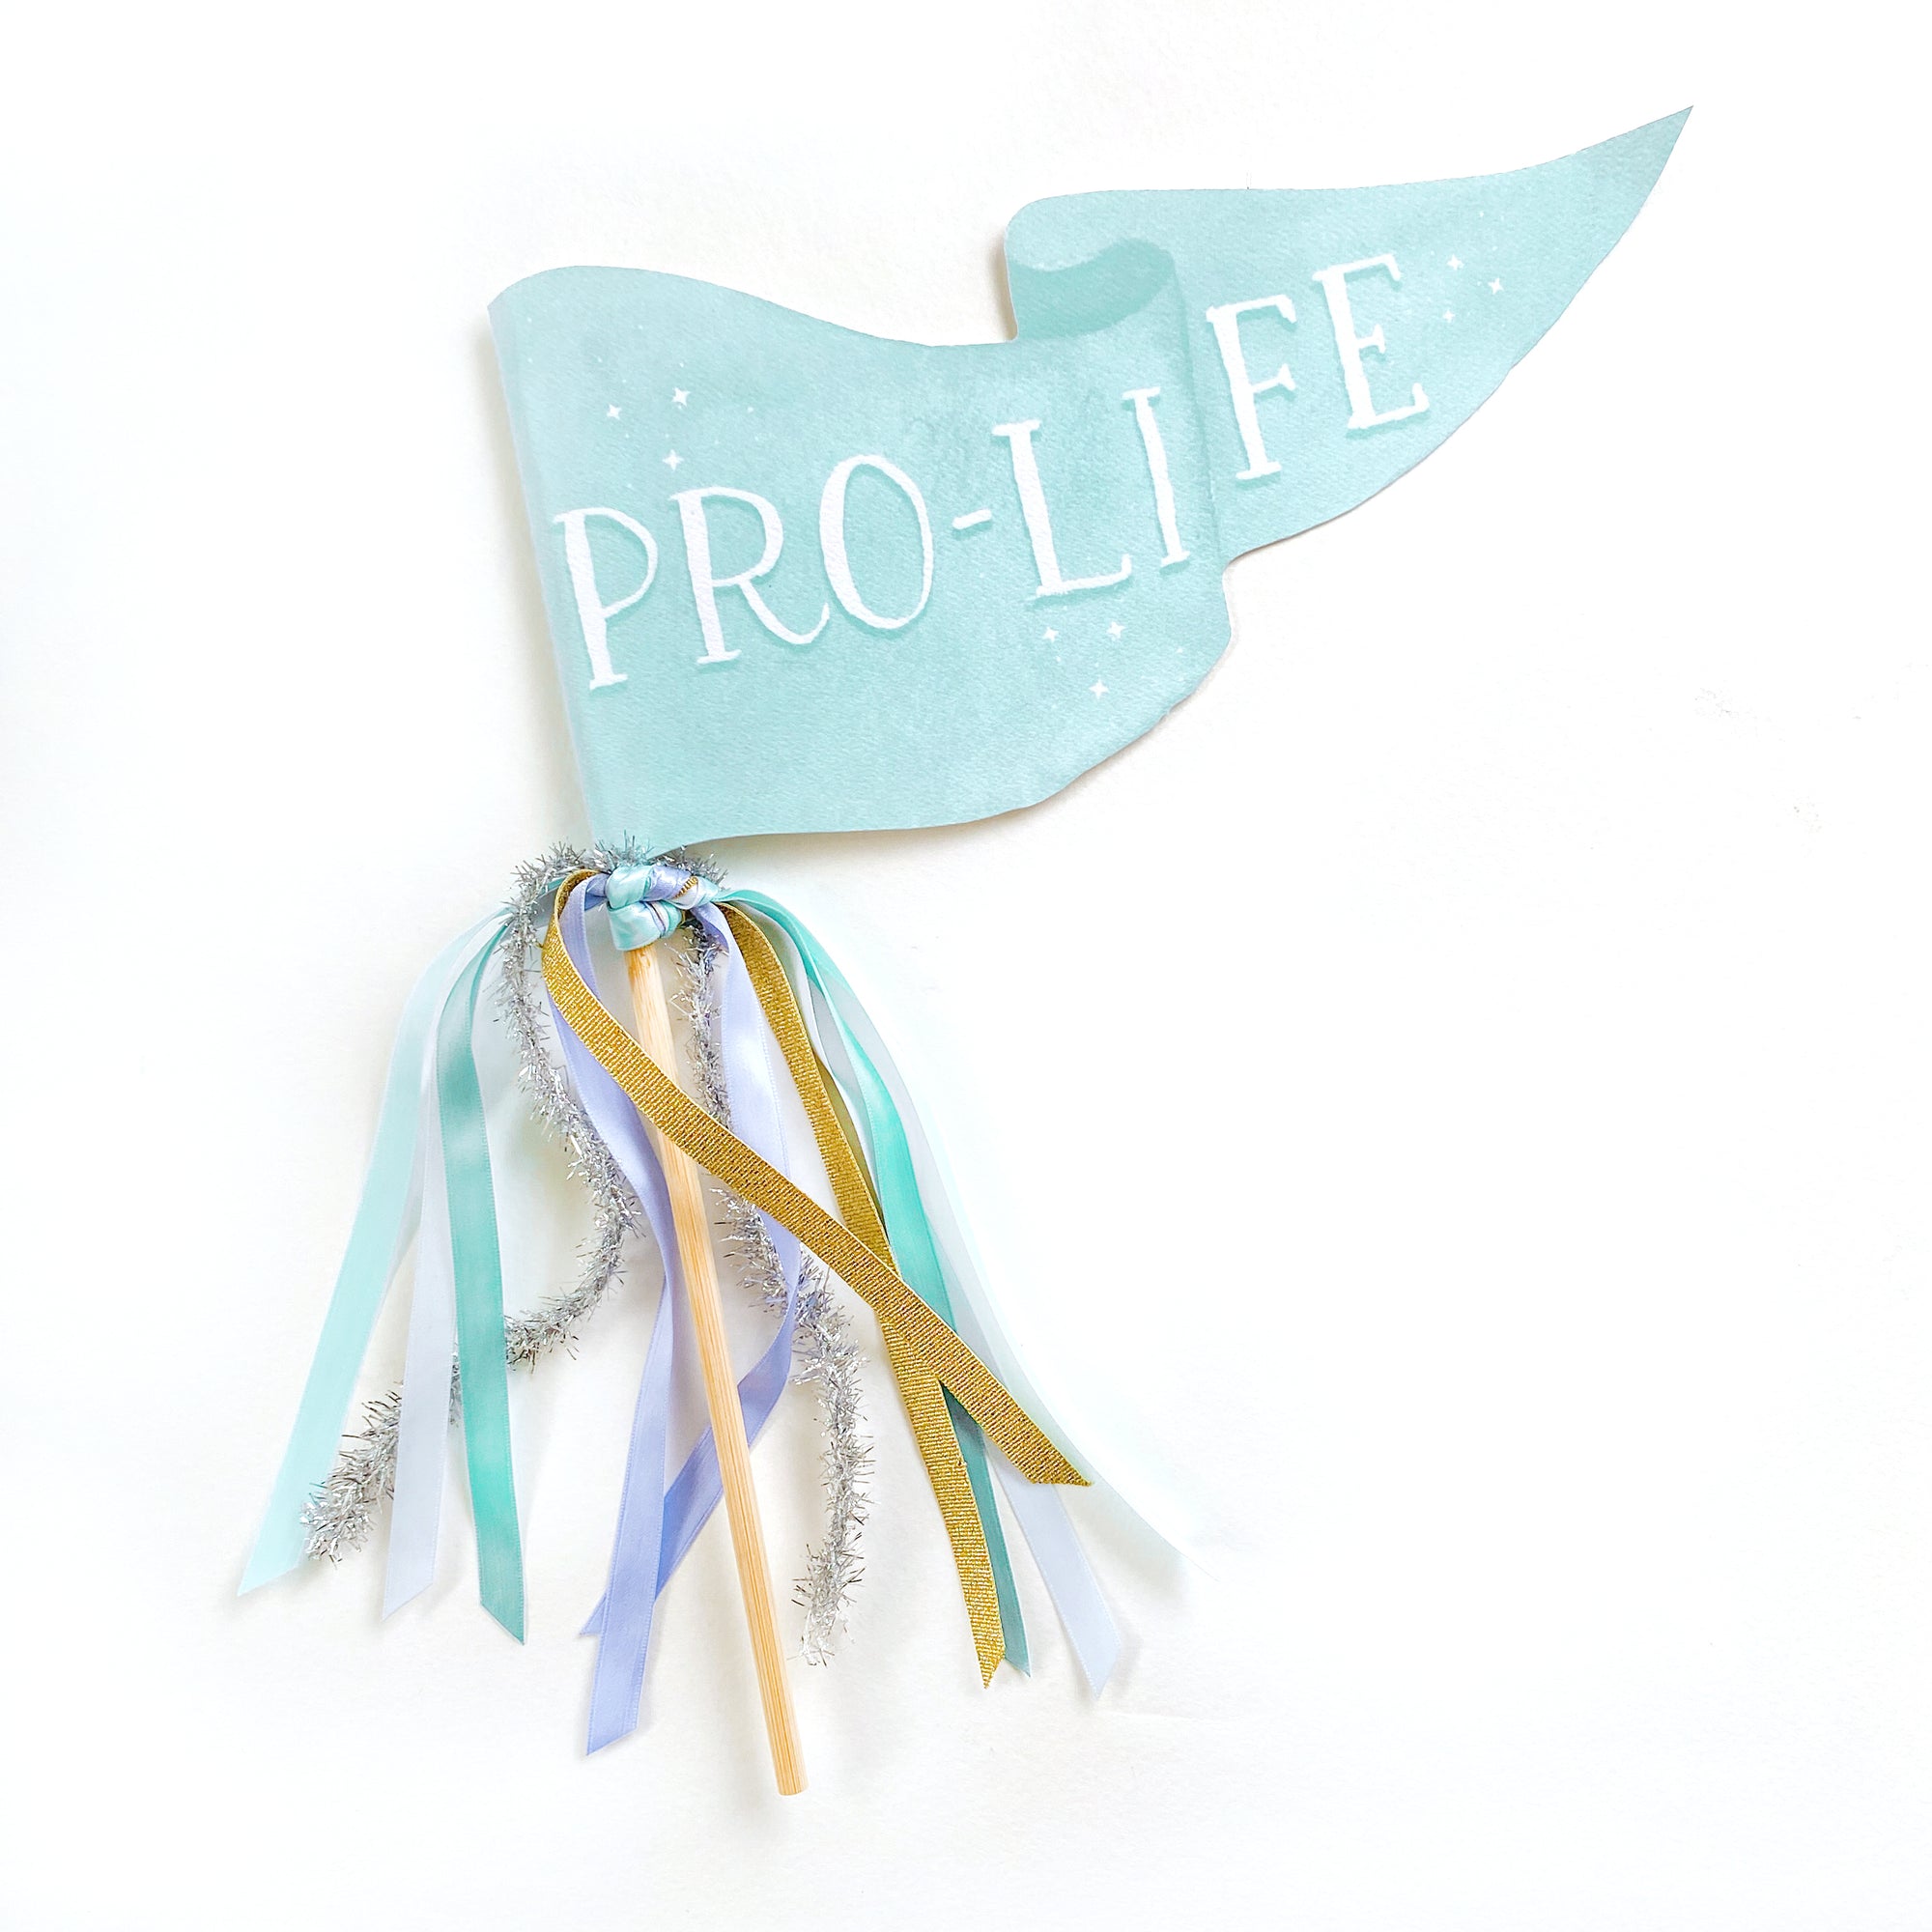 Pro-Life Party Pennant (Walk for Life Fundraiser)